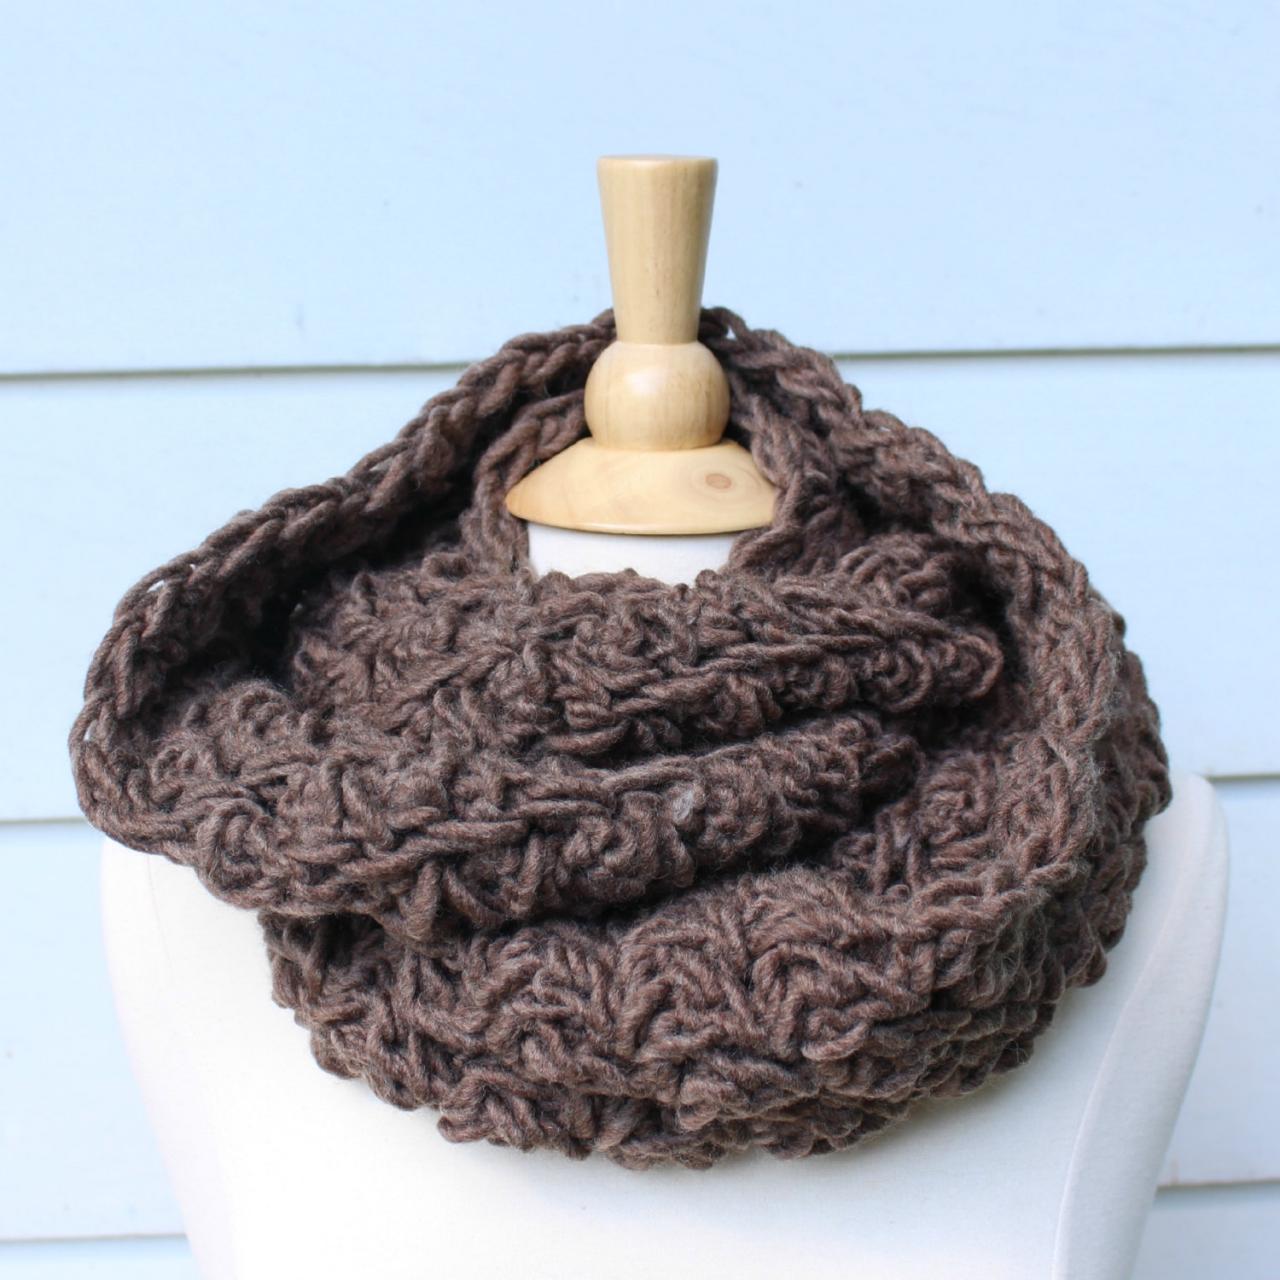 Crochet Scarf - Hand Crochet Infinity Scarf - Brown Cowl Scarf - Circle Scarf - Warm Womens Winter Scarf - Wool Blend - Ready To Ship